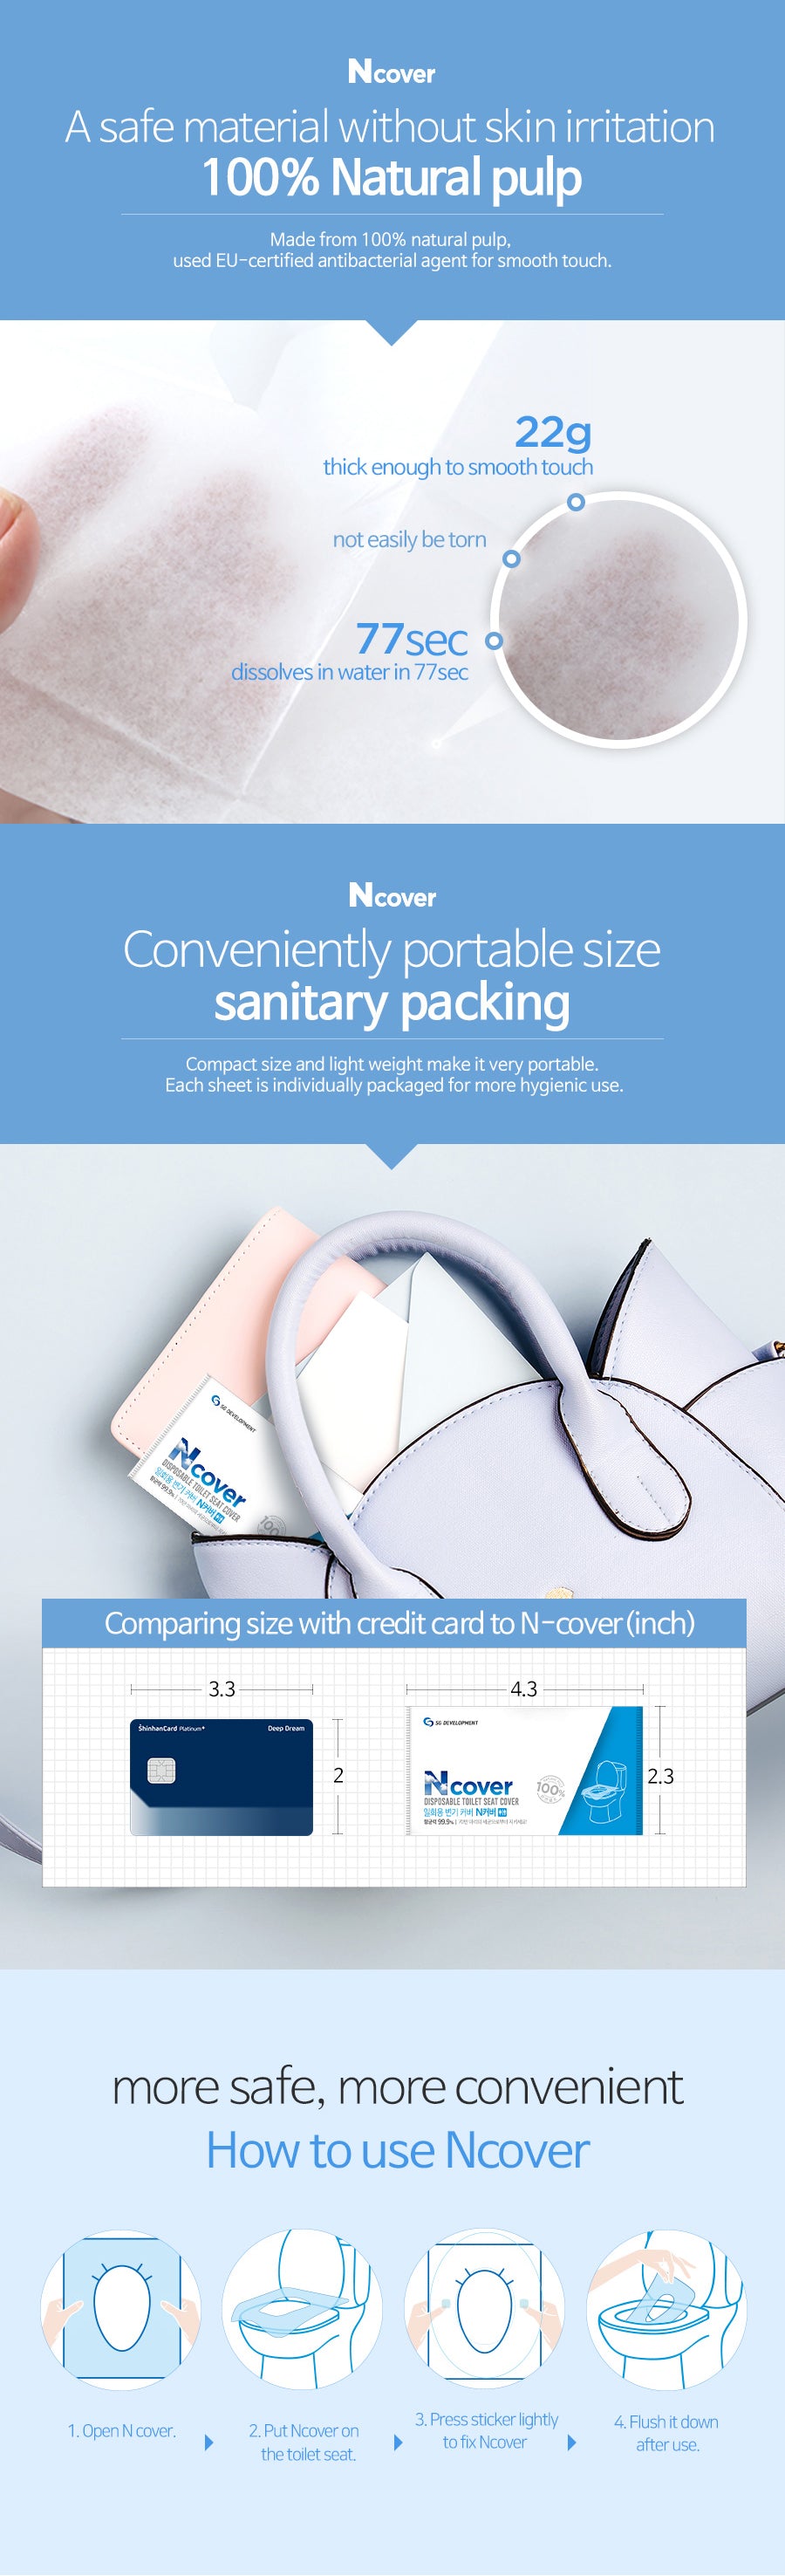 Ncover Disposable Toilet Seat Cover 20pcs (box) Ncover